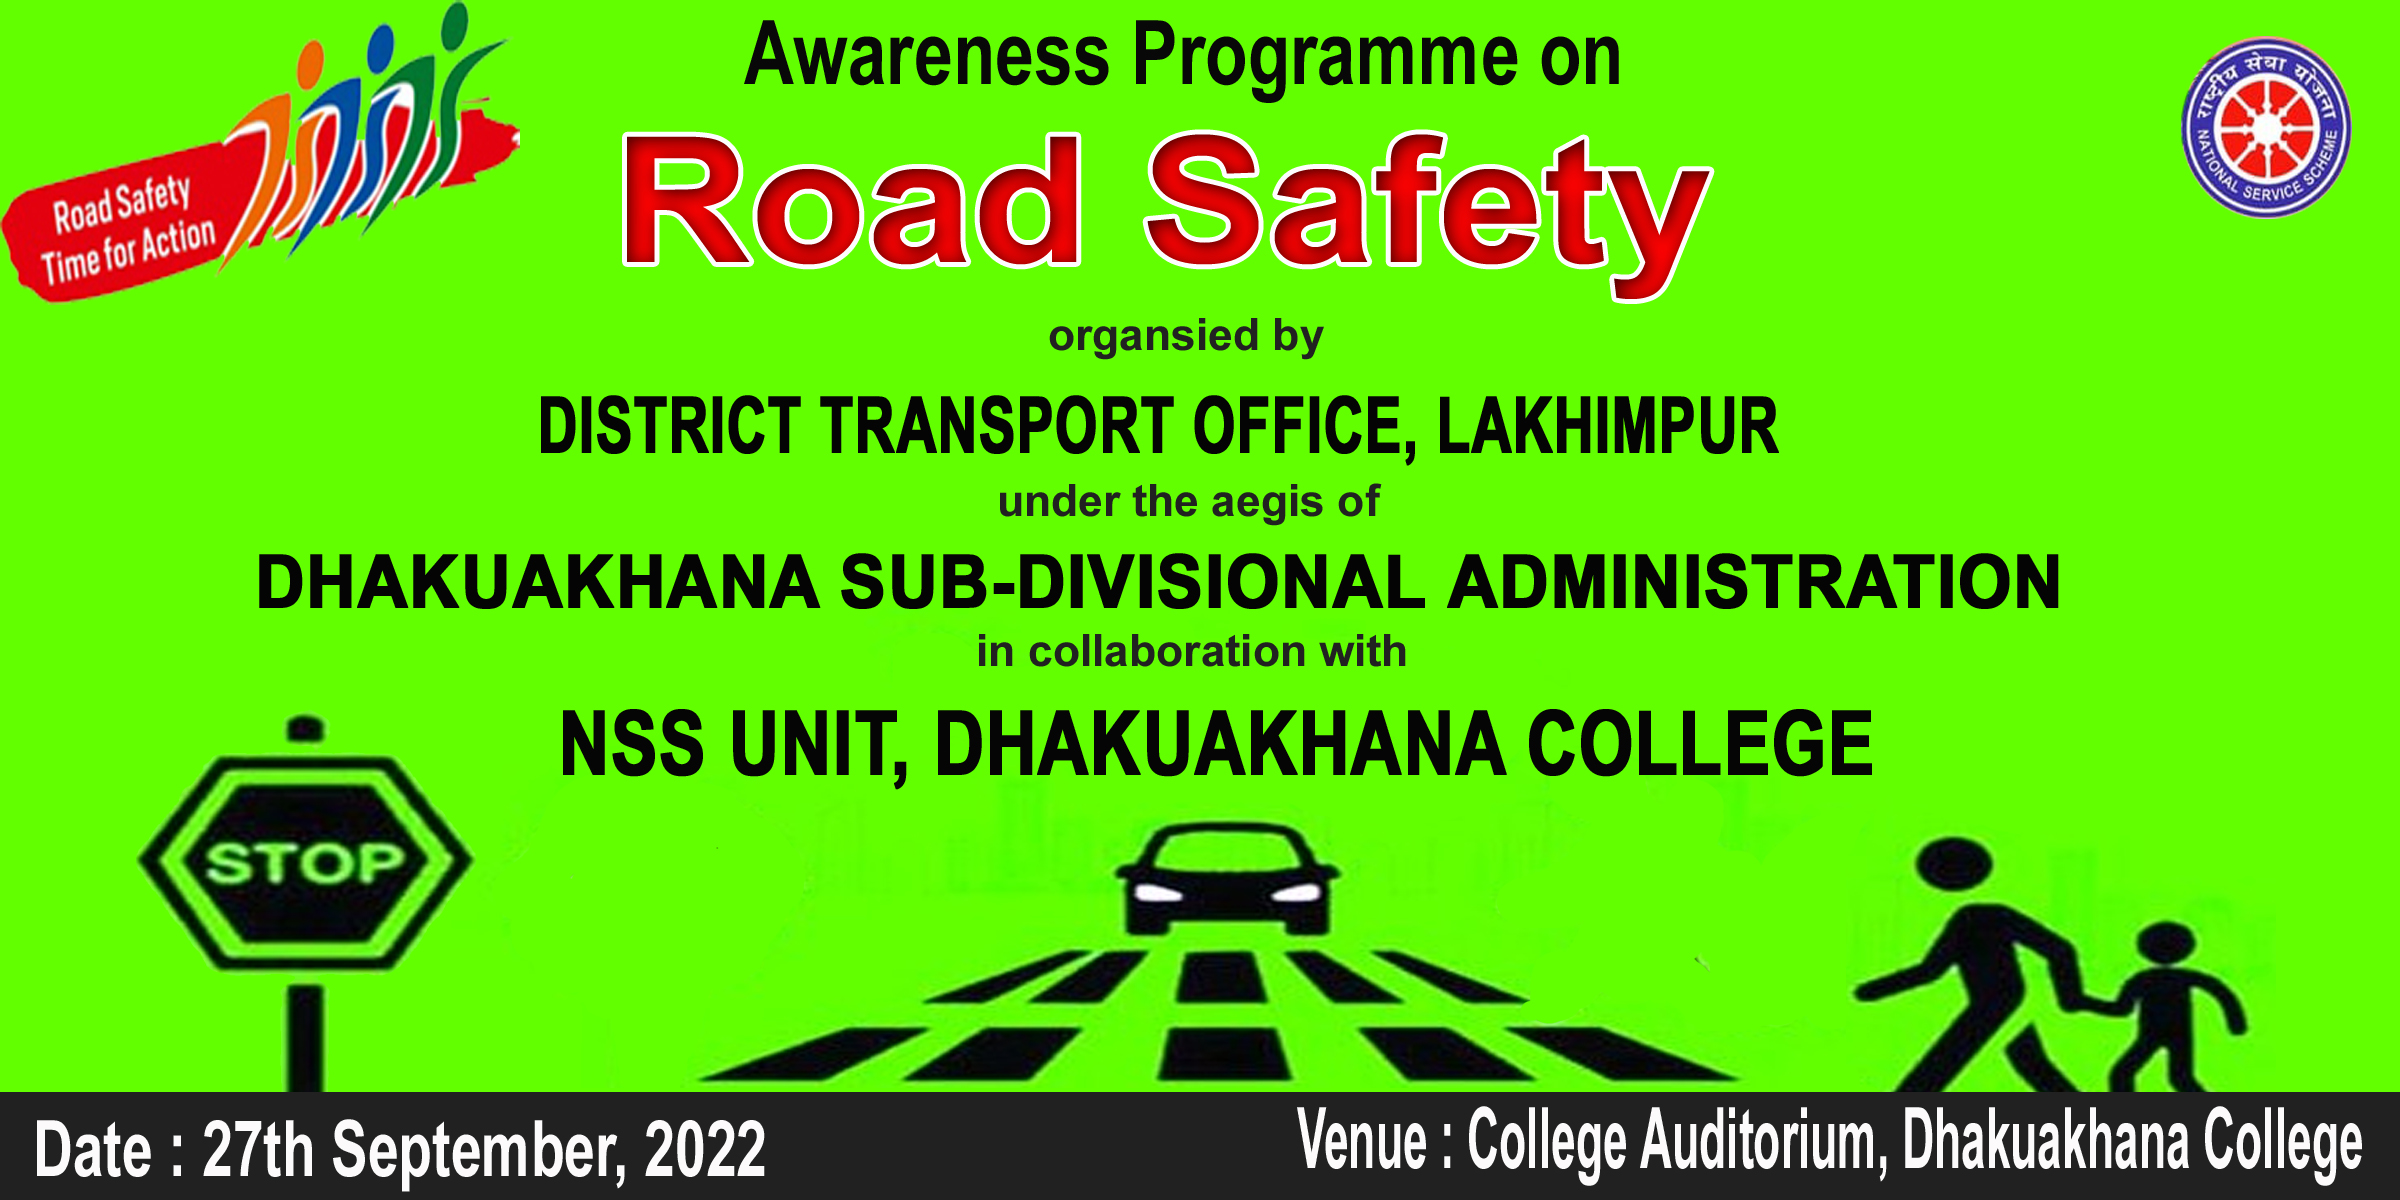 Road Safety organised by District Transport office